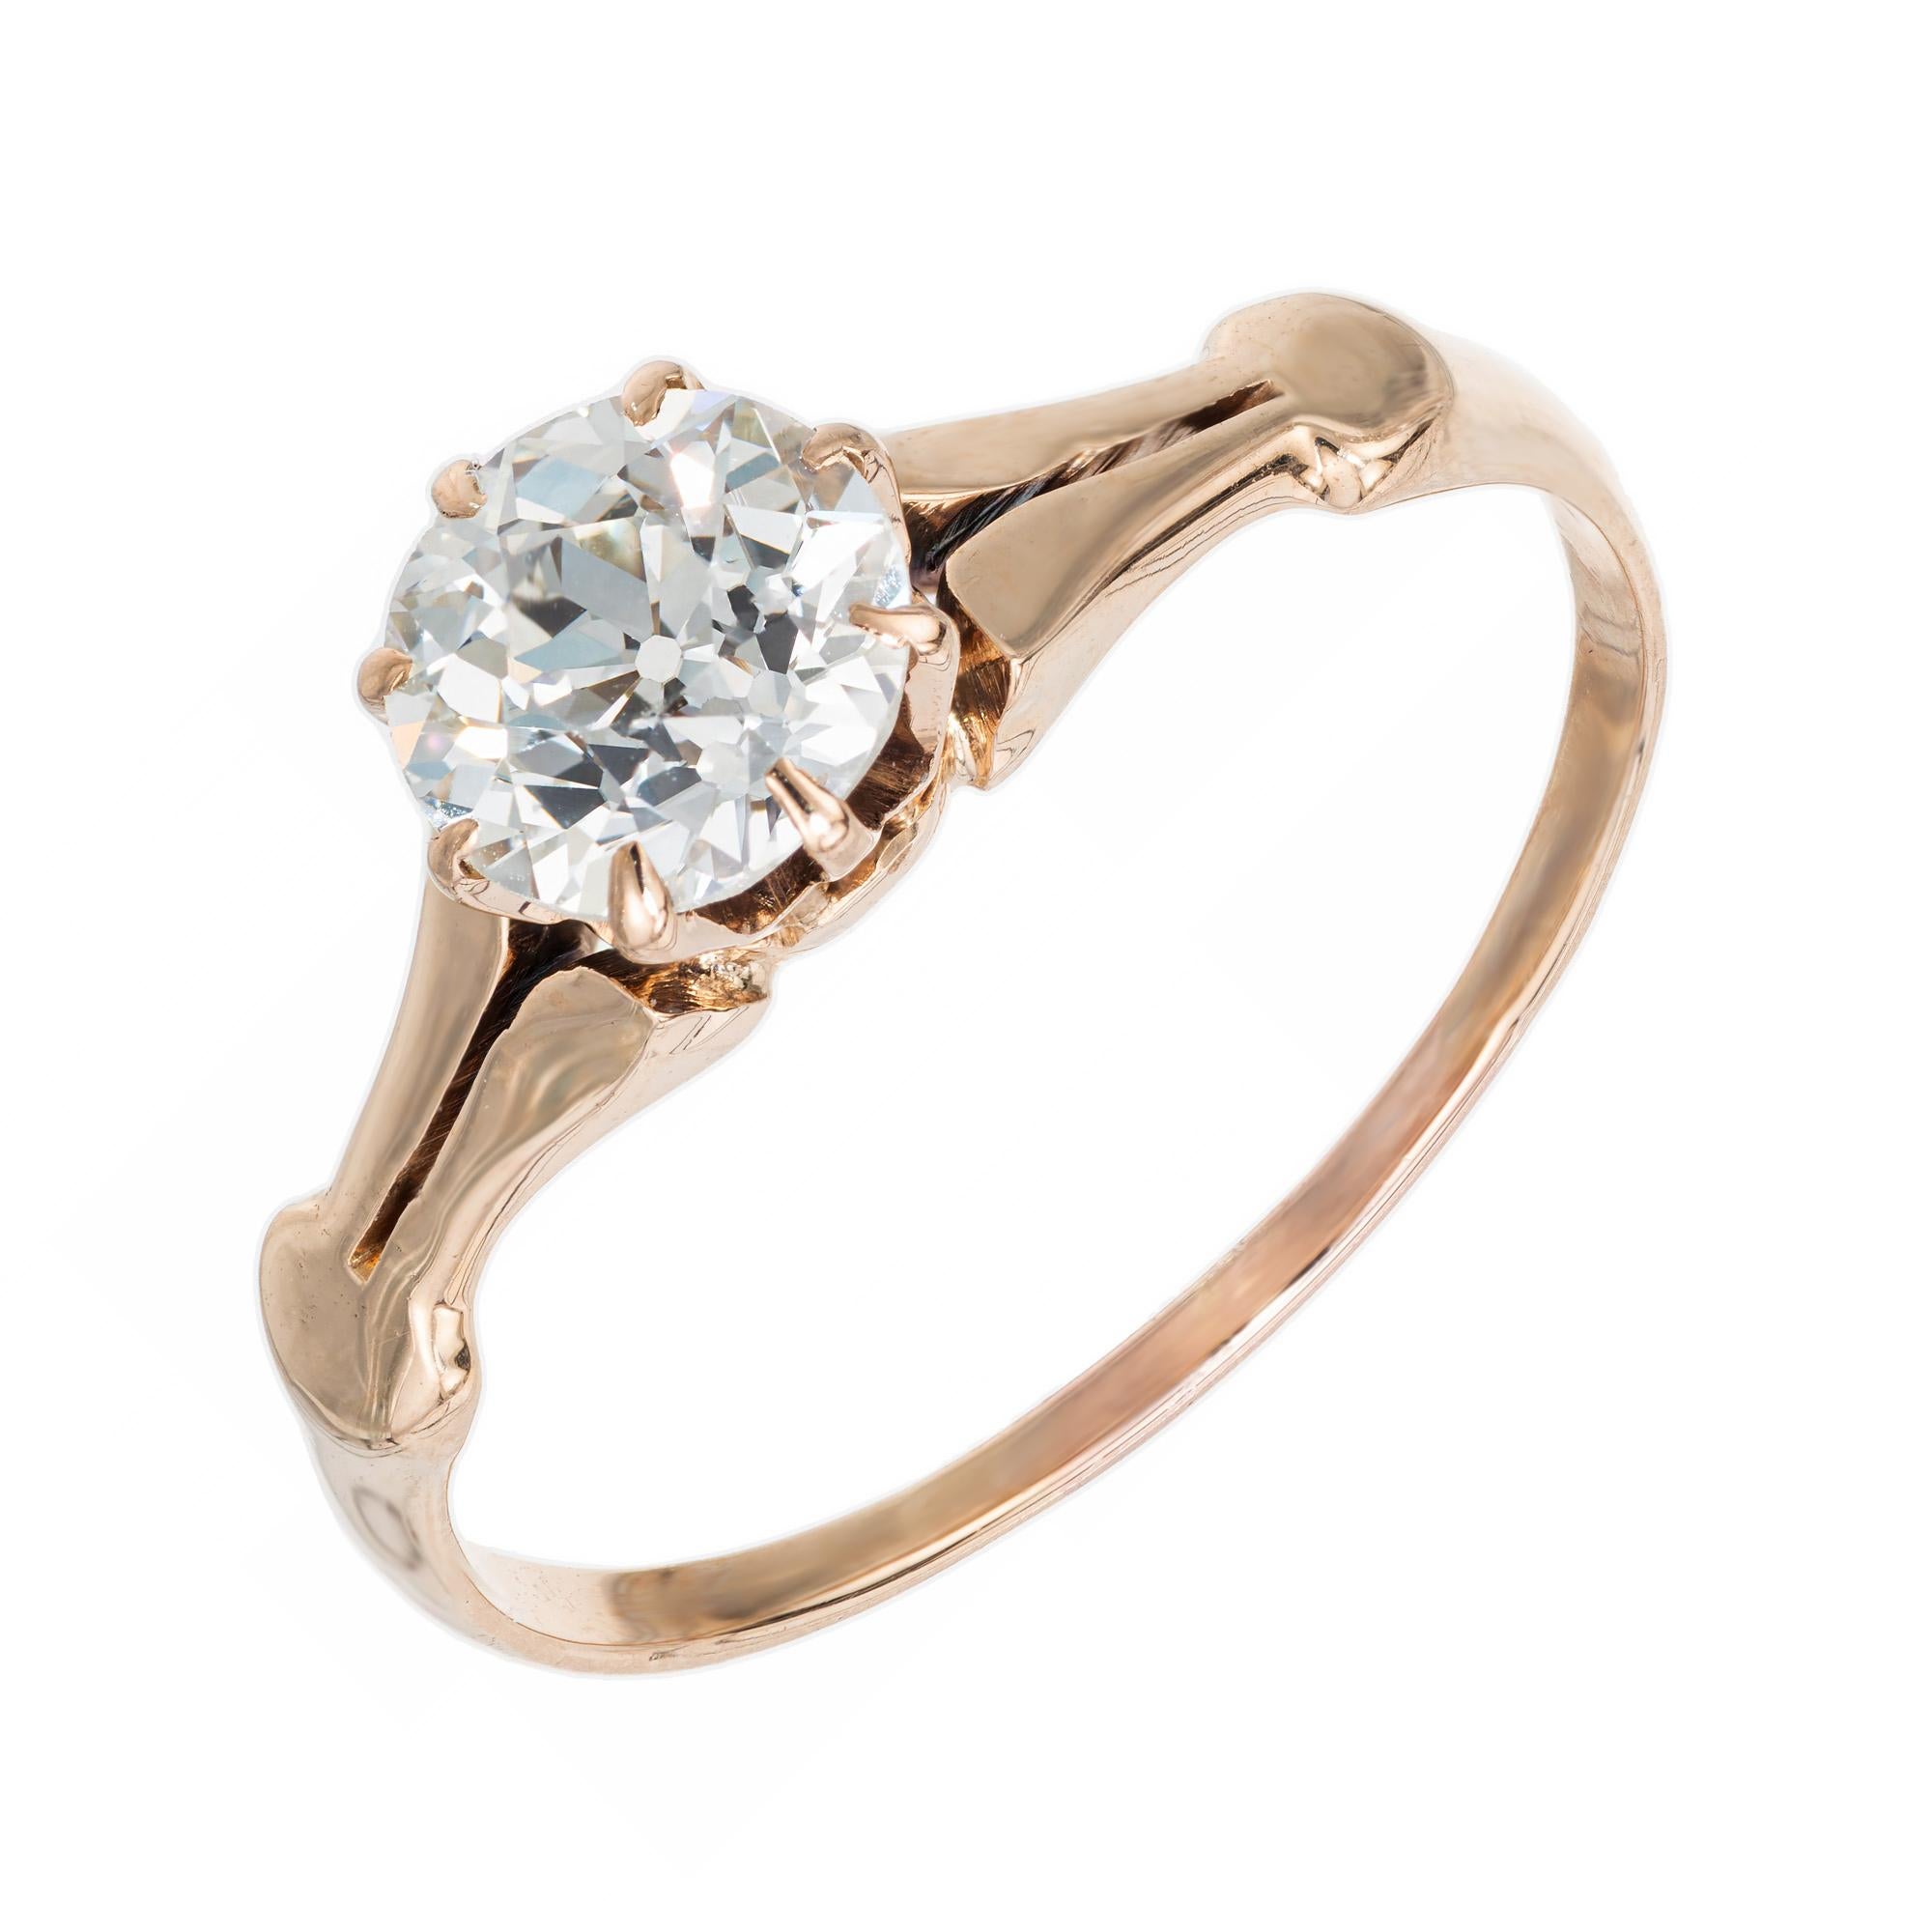 Original 1890's rose gold diamond engagement ring. EGL certified Old European cut .82 carat center diamond, mounted in a 14k rose gold eight prong setting.  EGL certified as I, near colorless. Perfect example of a timeless turn of the century